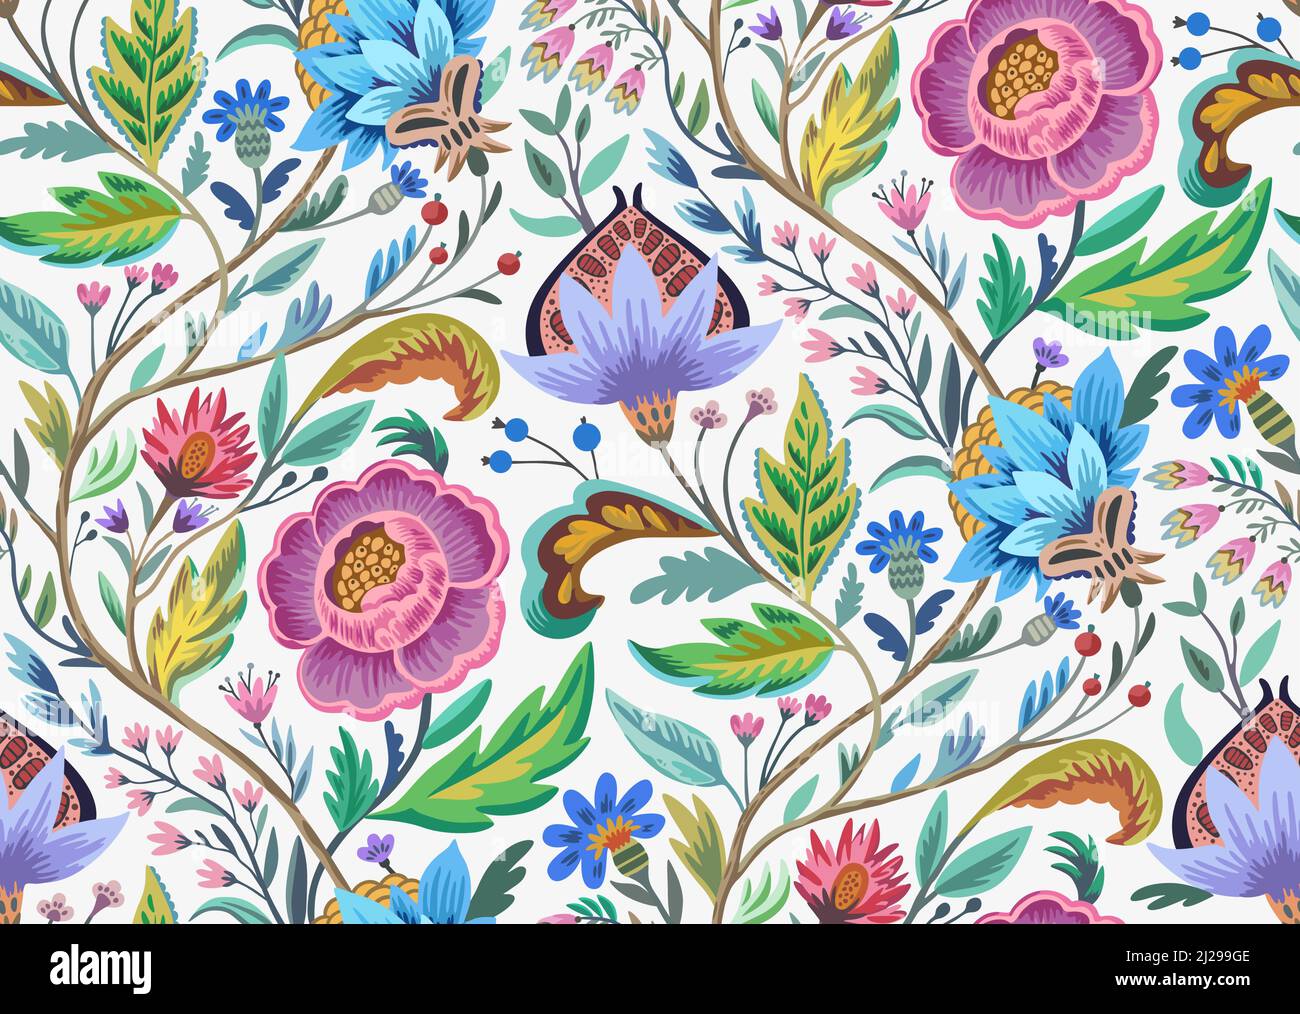 Vintage floral ornamental pattern ni victorian style for decor, wallpaper, fabric design. Stock Vector